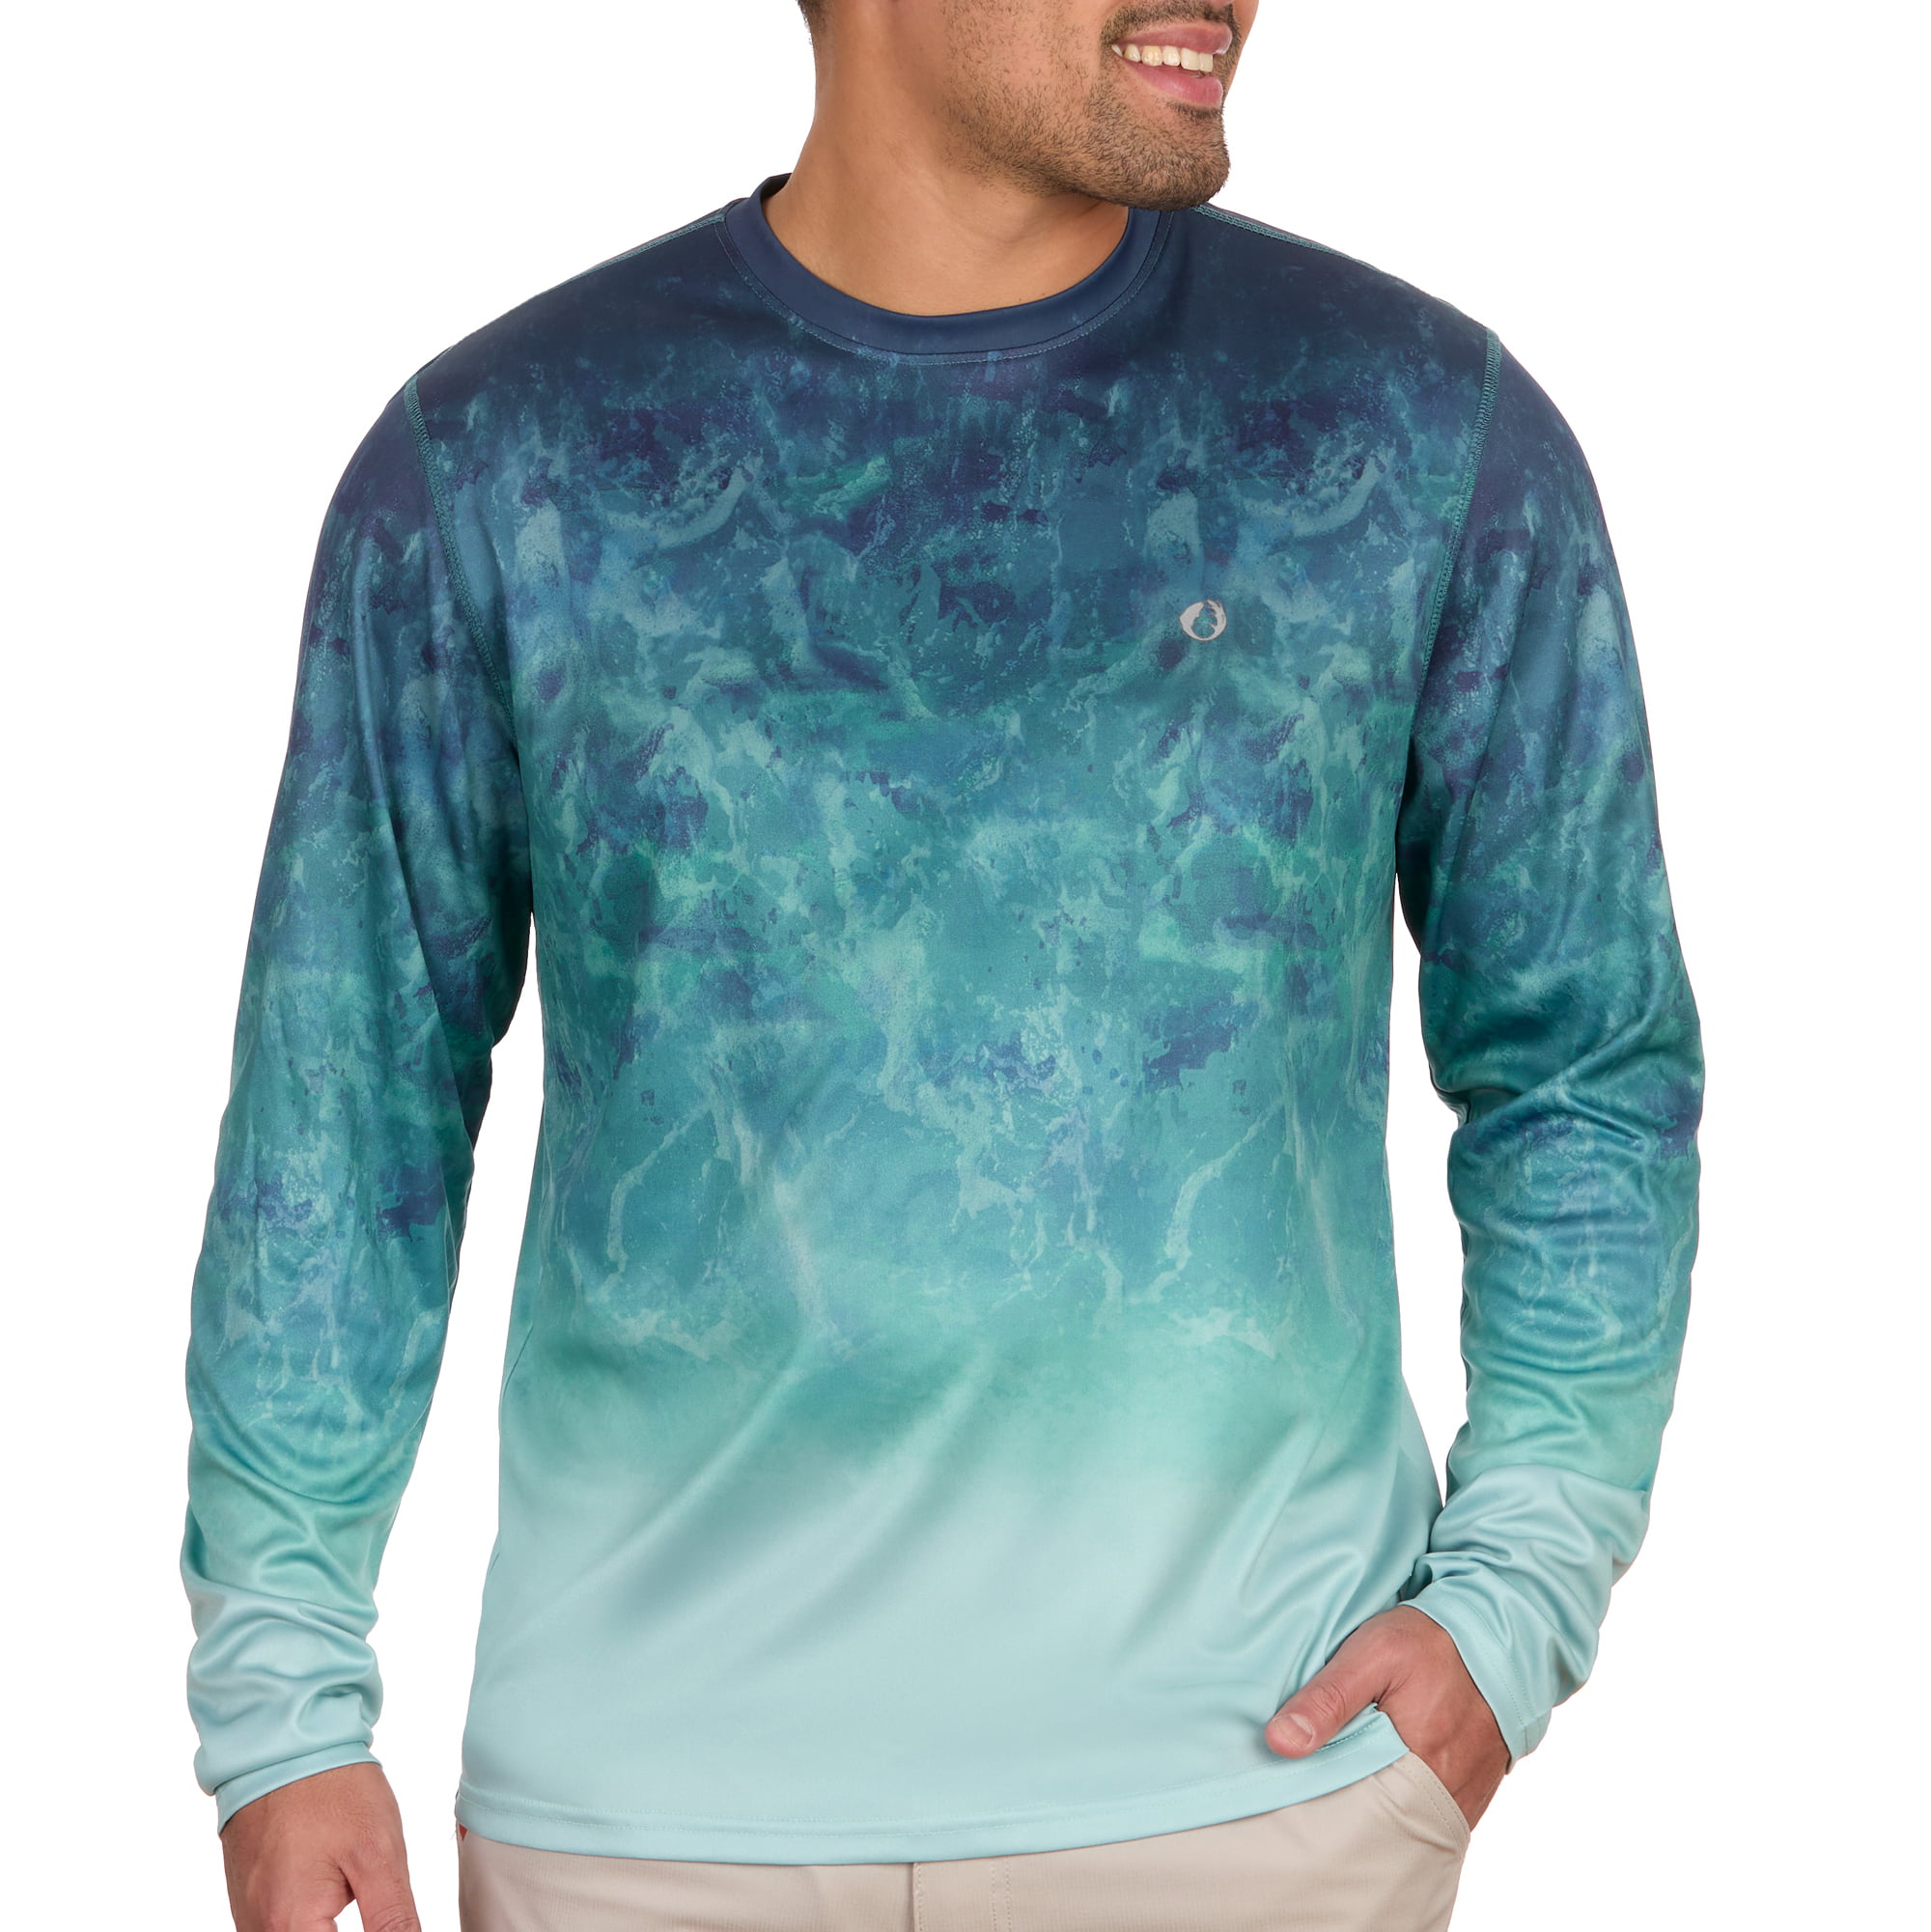 The American Outdoorsman Men's Lightweight UPF 50+ UV Sun Protection  Outdoor Long Sleeve Quick Dry Graphic Shirt (Open Sea, Large) 